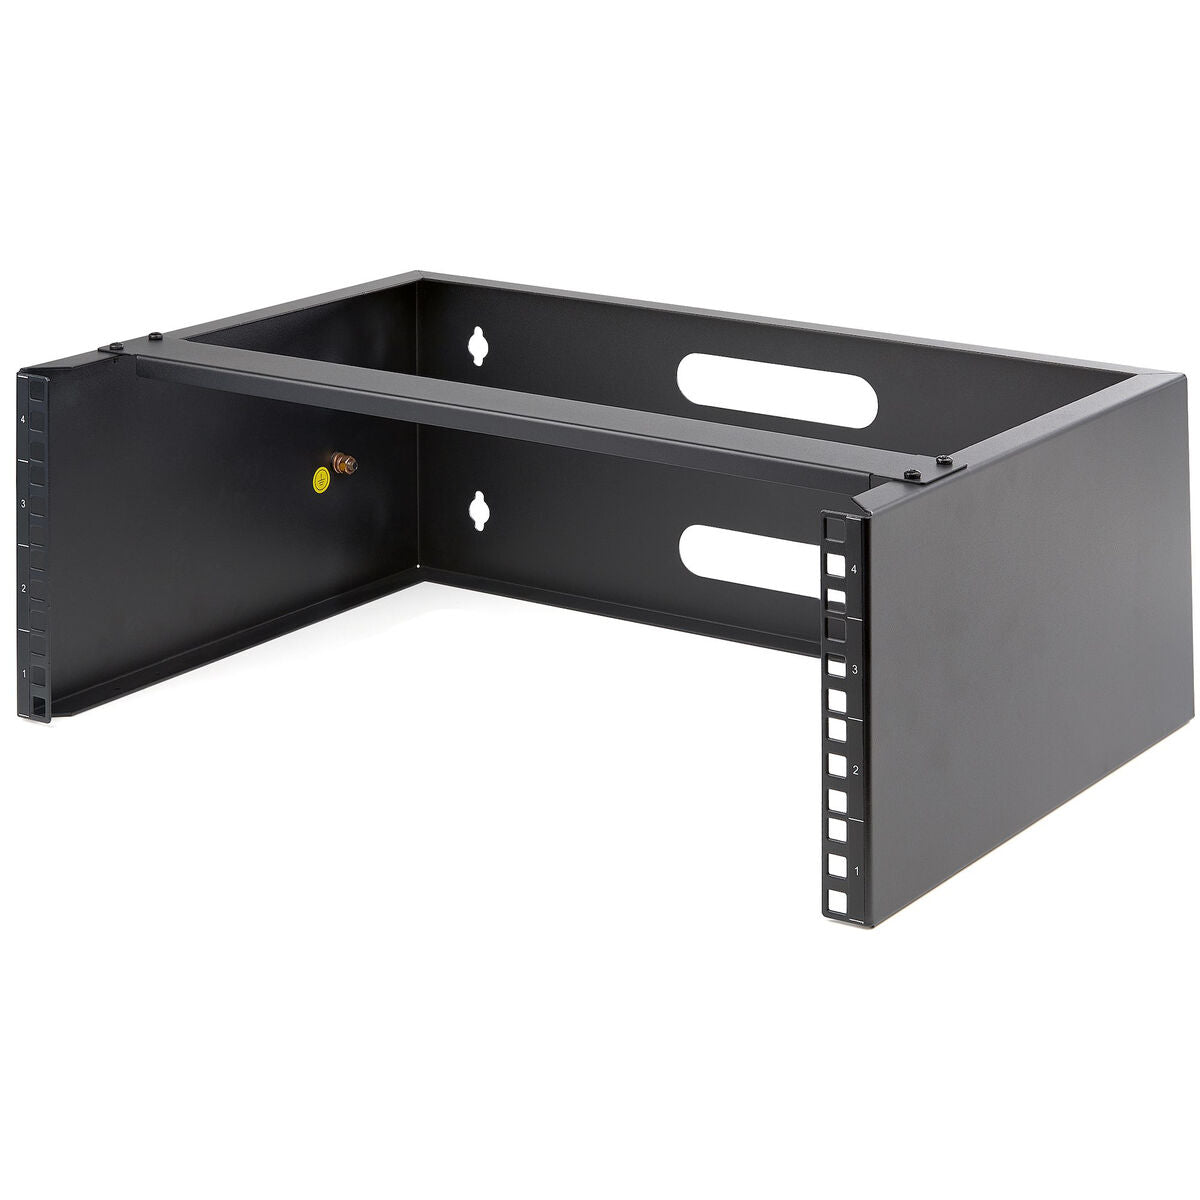 Fixed Tray for Wall Rack Cabinet Startech WALLMOUNT4, Startech, Computing, Accessories, fixed-tray-for-wall-rack-cabinet-startech-wallmount4, Brand_Startech, category-reference-2609, category-reference-2803, category-reference-2828, category-reference-t-19685, category-reference-t-19908, Condition_NEW, furniture, networks/wiring, organisation, Price_50 - 100, Teleworking, RiotNook